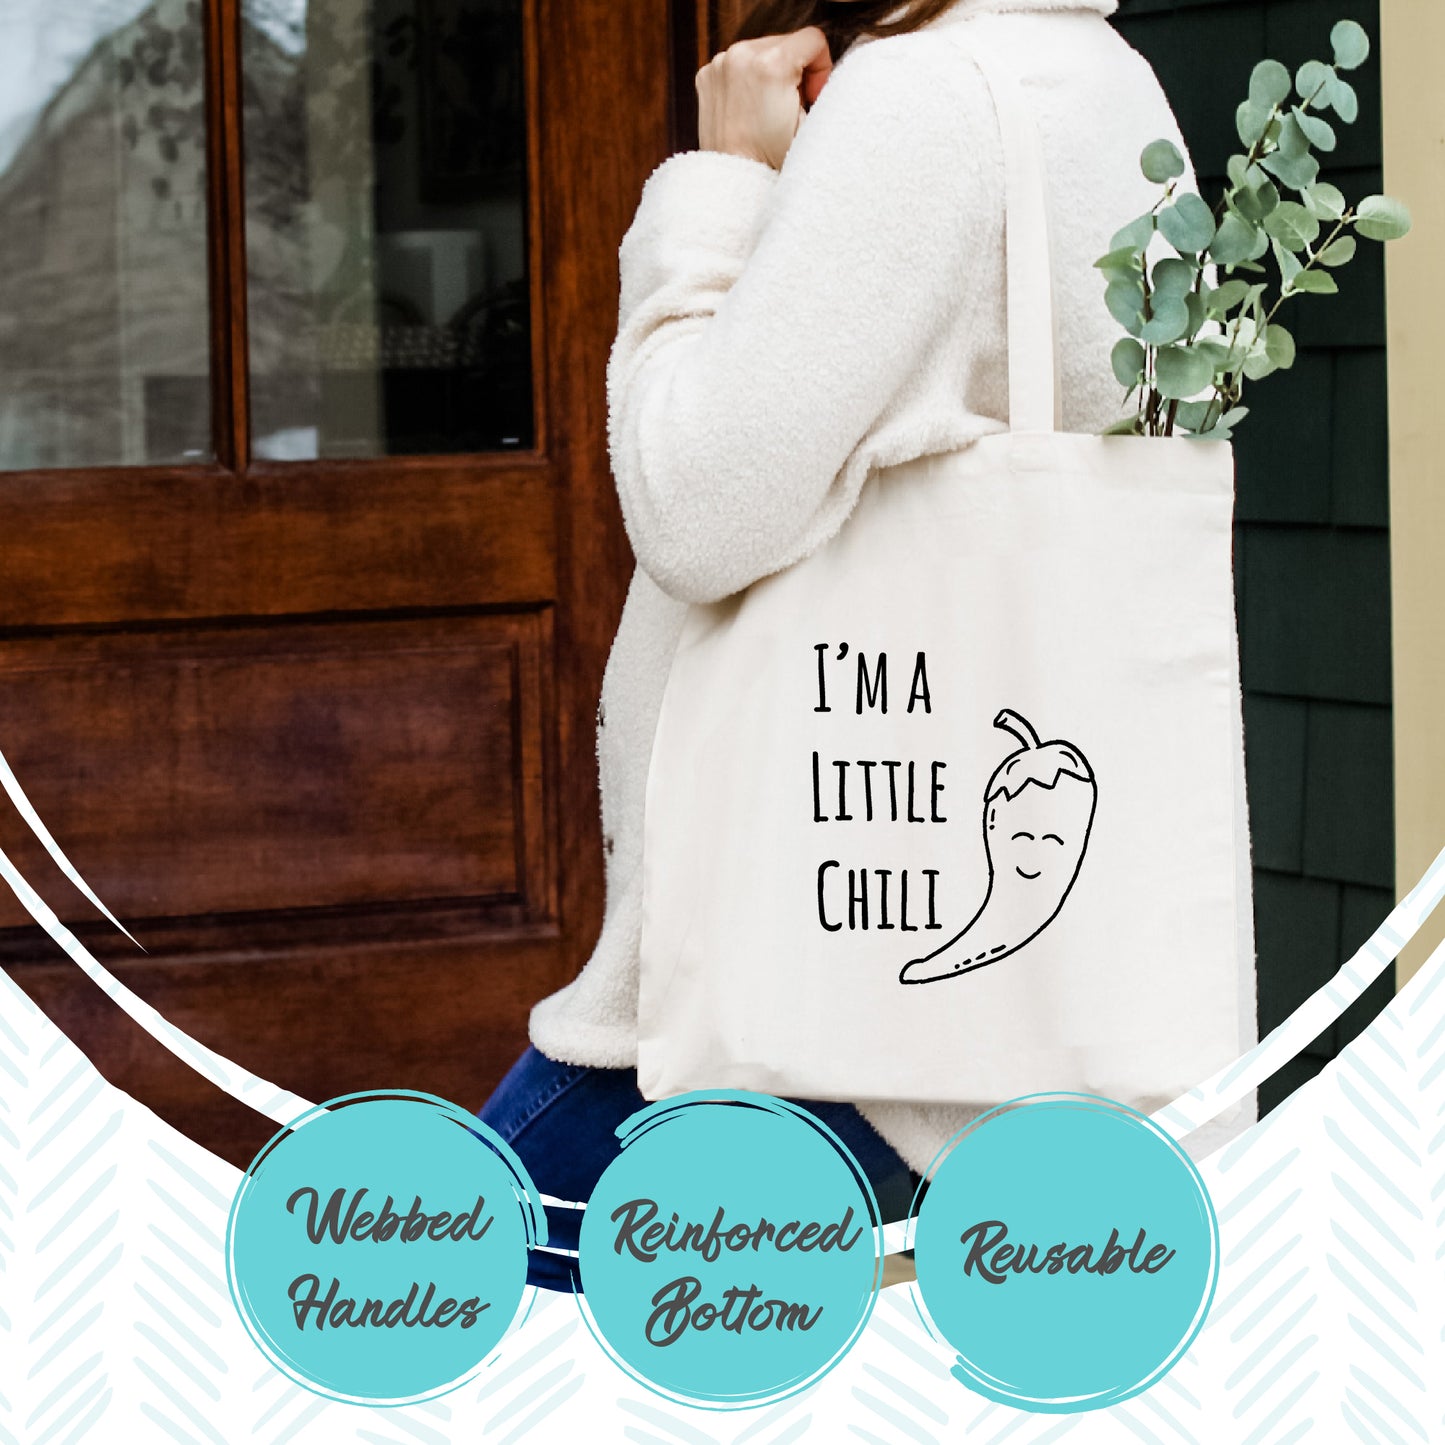 Leo Zodiac (But Let's Get Back to Me) - Tote Bag - MoonlightMakers